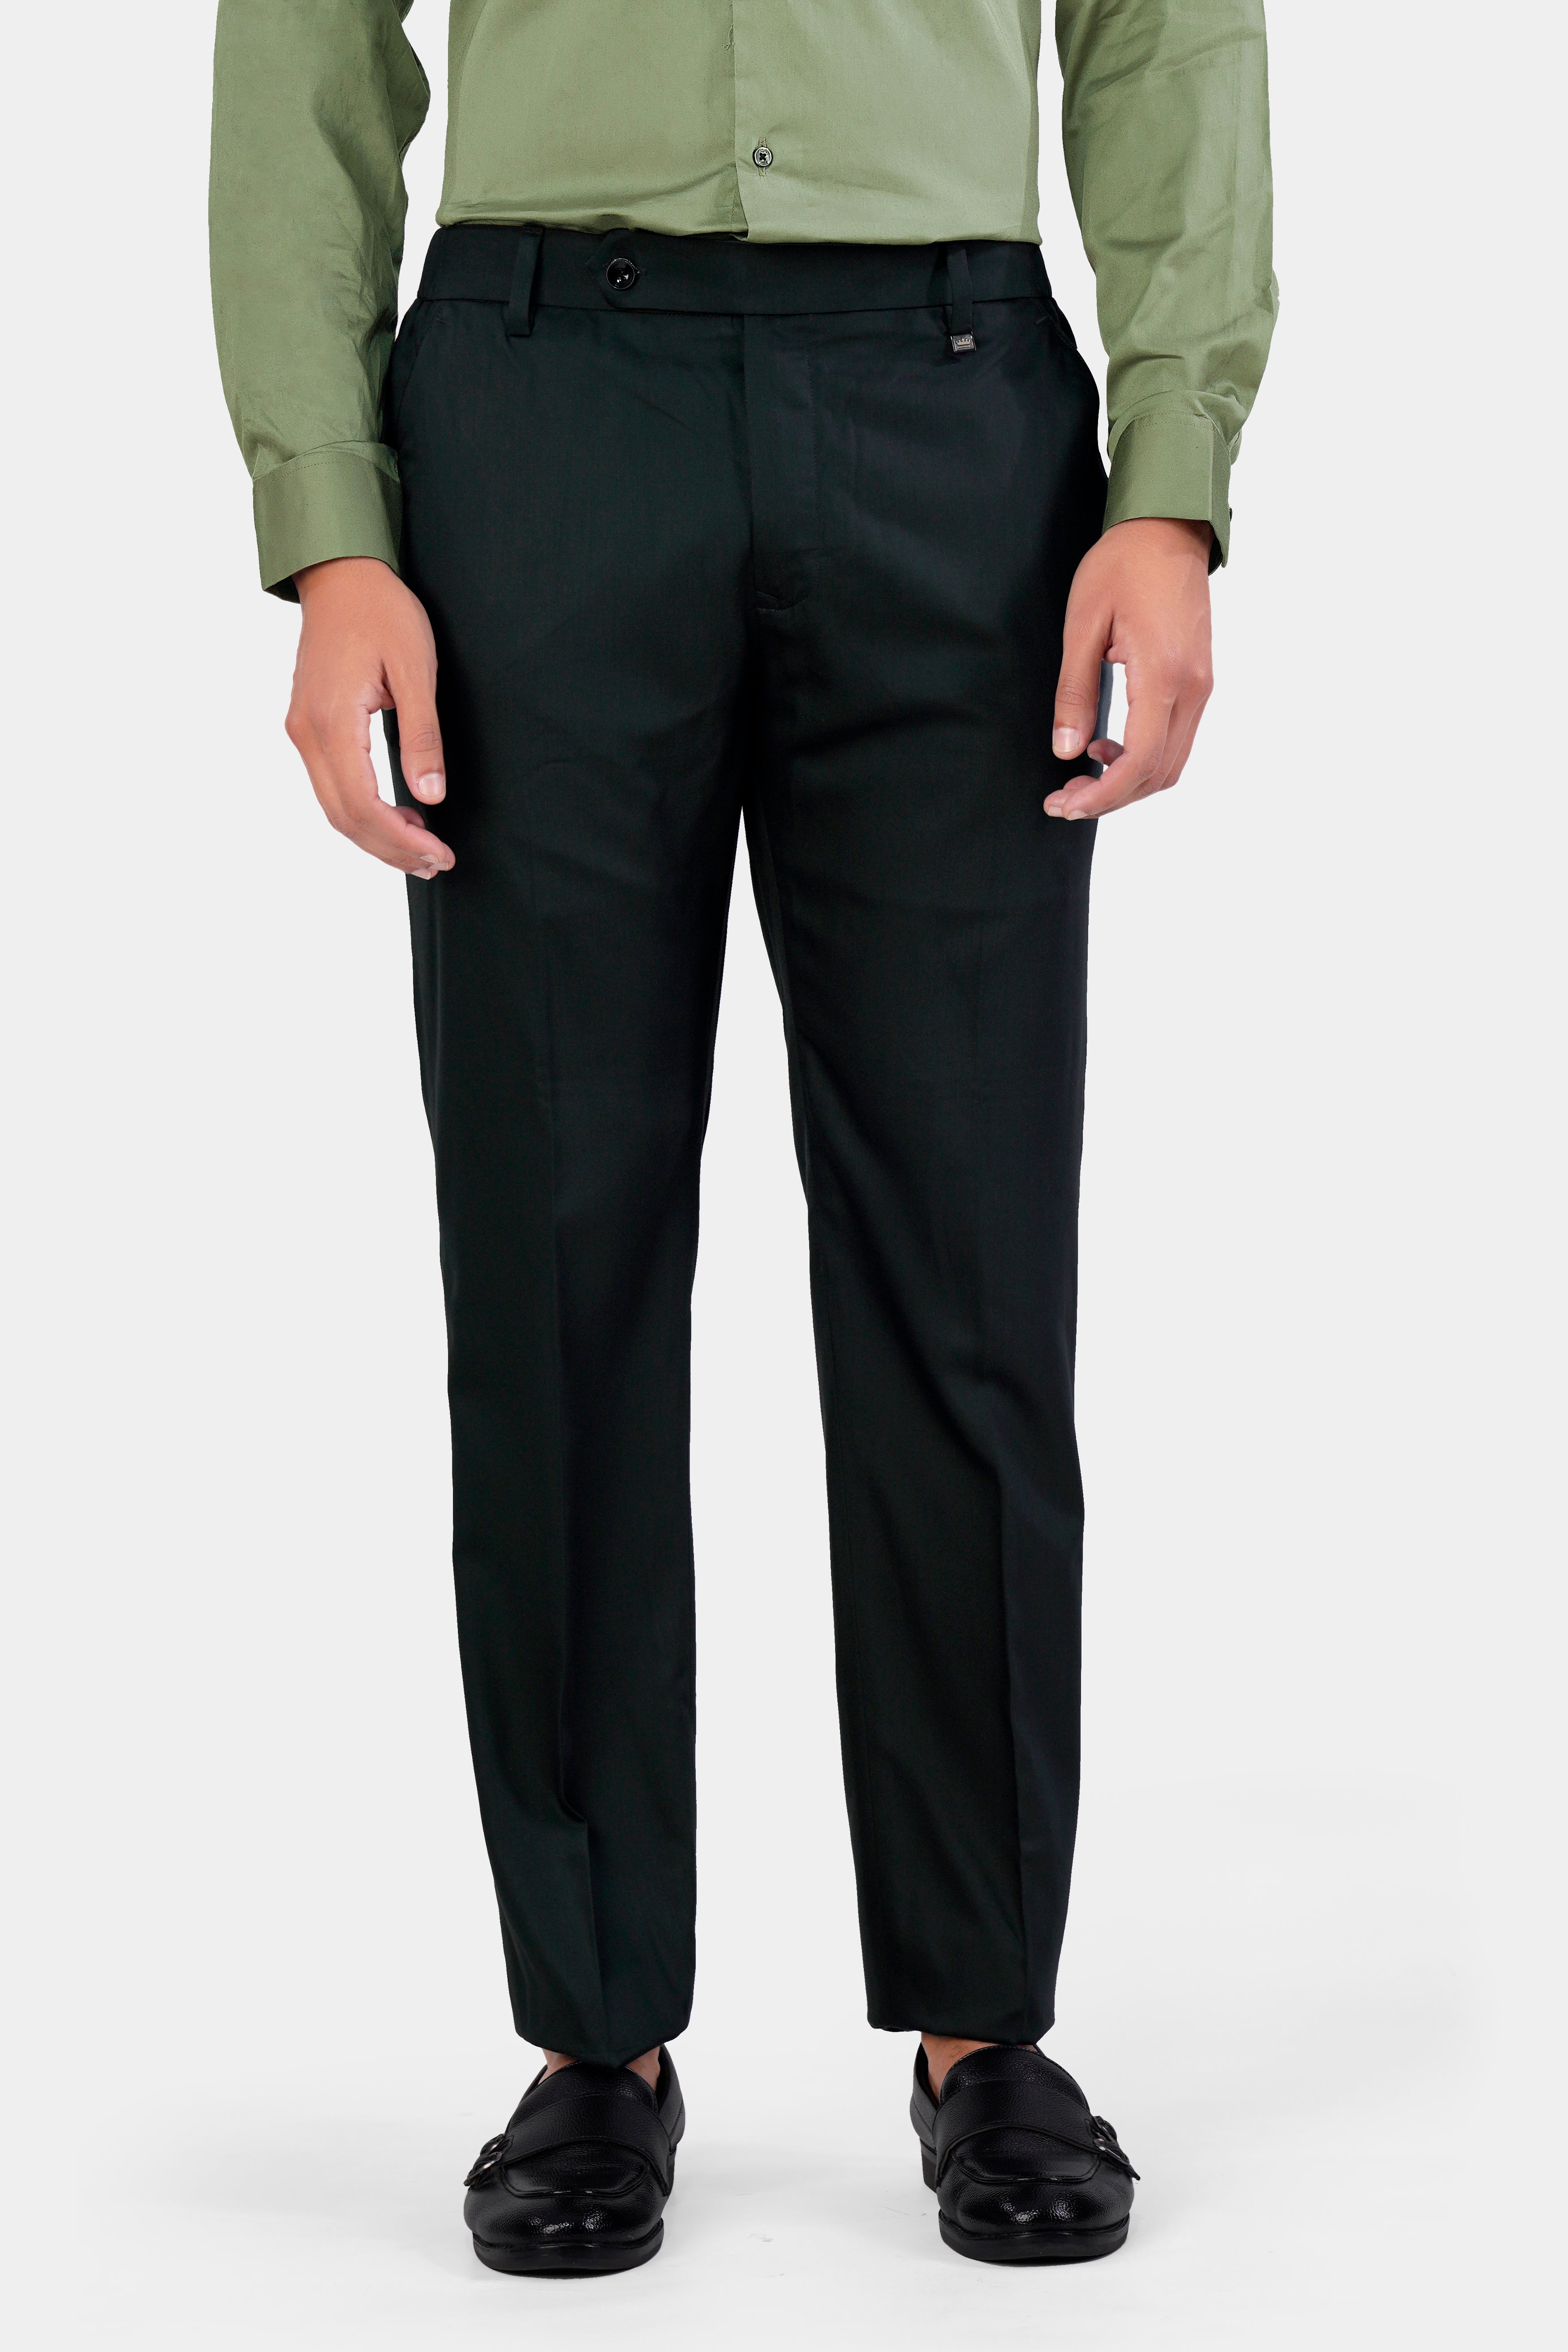 Prussian Green Wool Rich Stretchable Pant T2960-SW-28, T2960-SW-30, T2960-SW-32, T2960-SW-34, T2960-SW-36, T2960-SW-38, T2960-SW-40, T2960-SW-42, T2960-SW-44